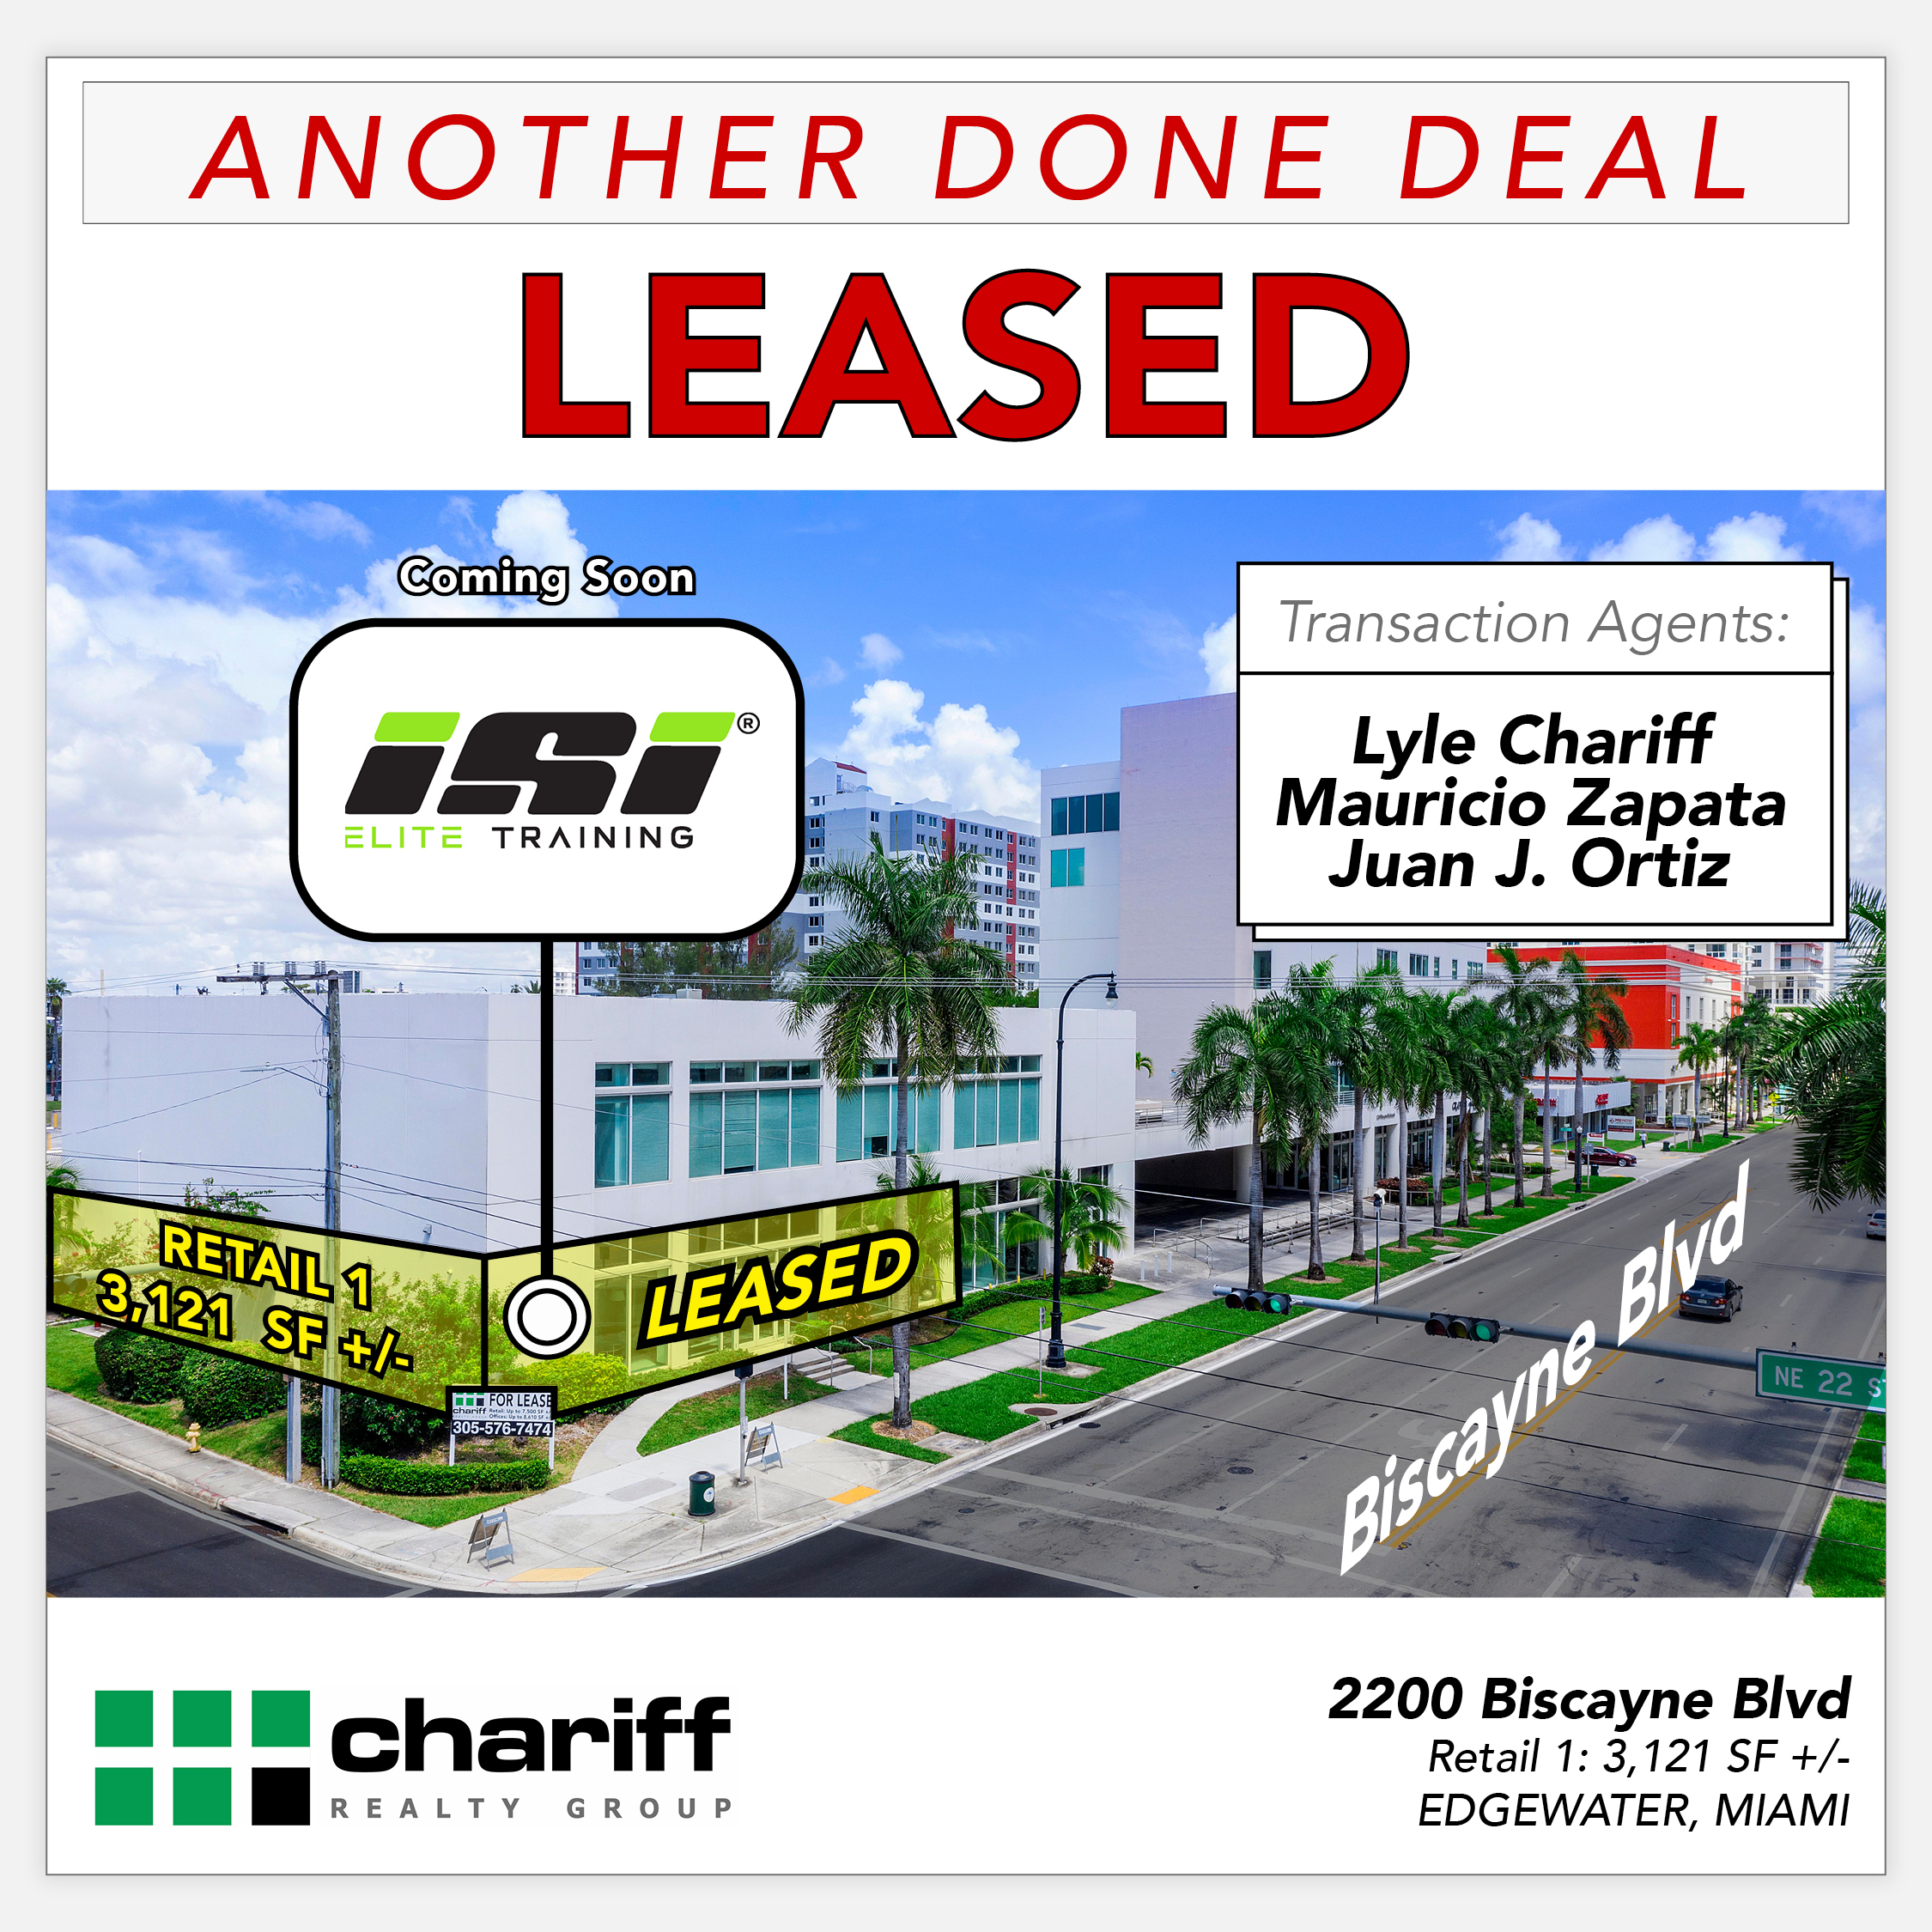 2200 Biscayne Blvd - Another Done Deal - Leased - Edgewater - Miami-Florida-33137-Chariff Realty Group